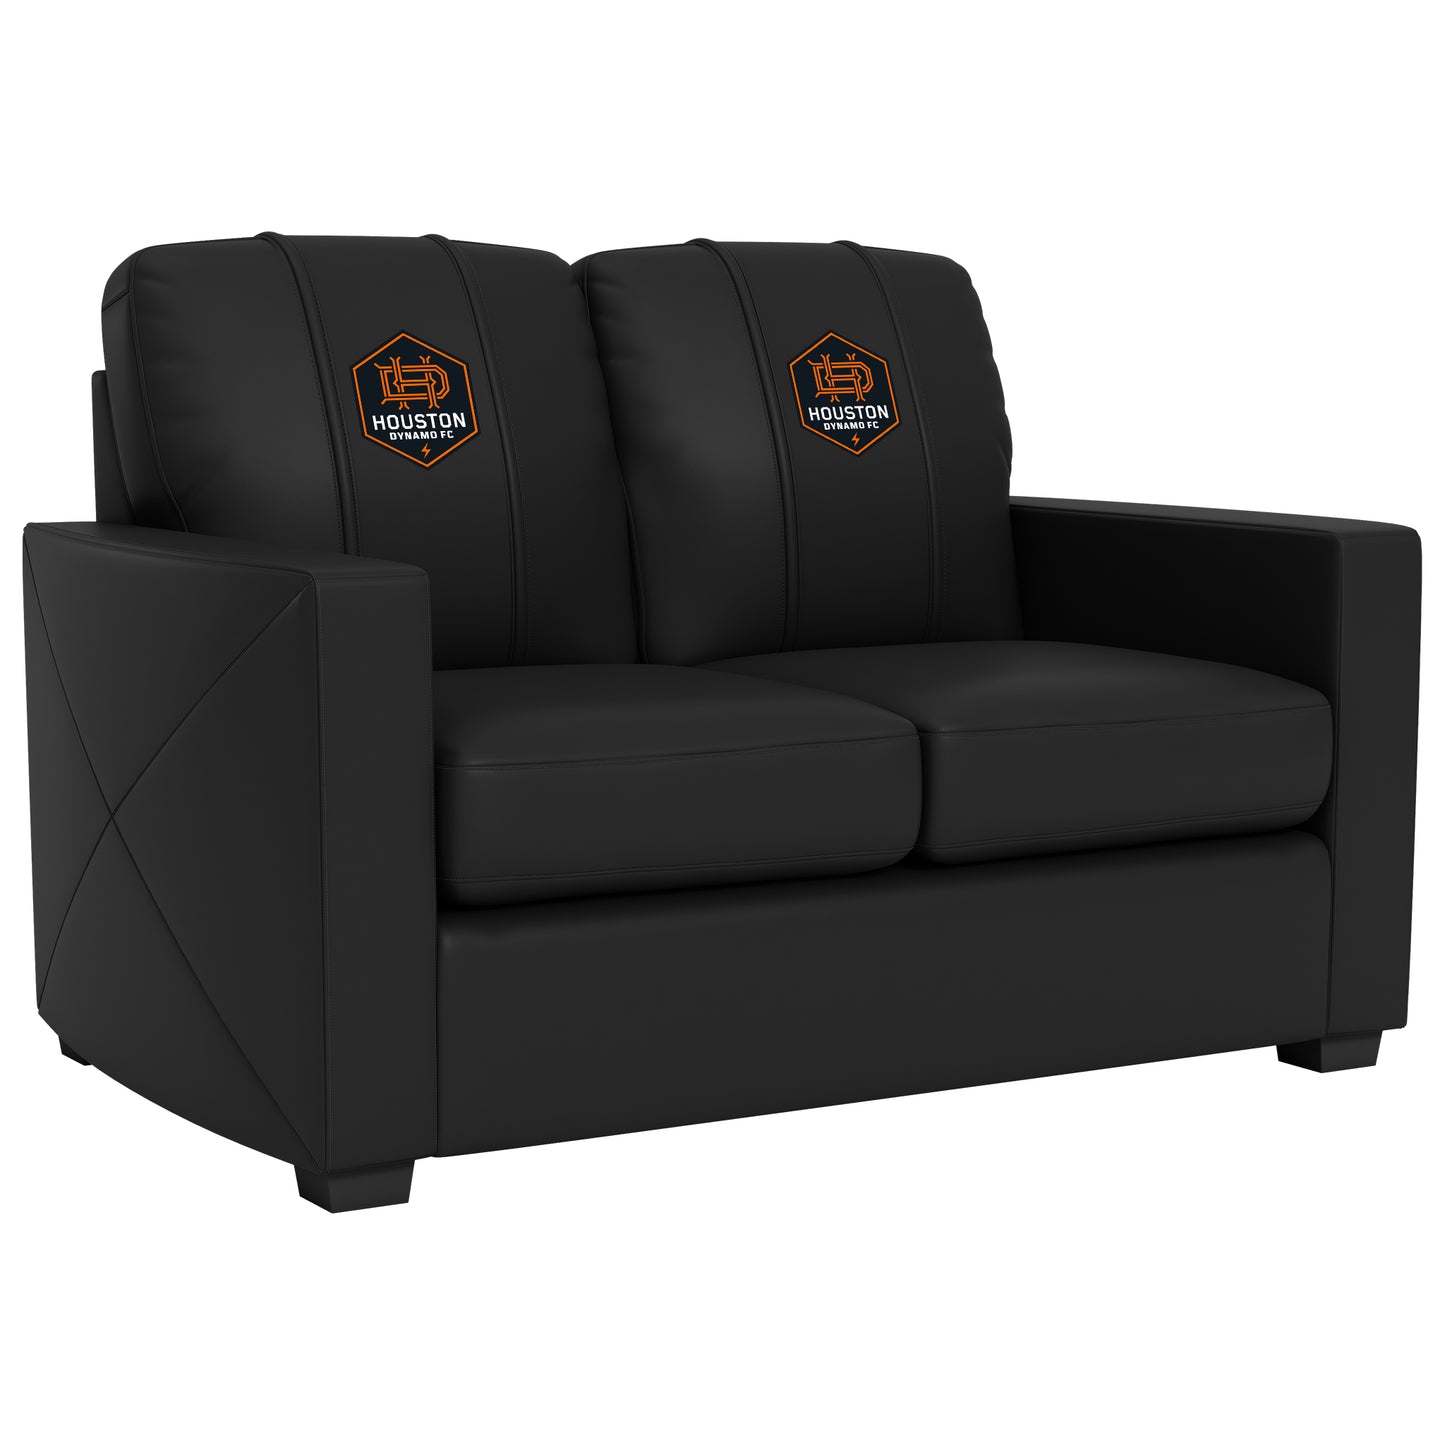 Silver Loveseat with Houston Dynamo Primary Logo